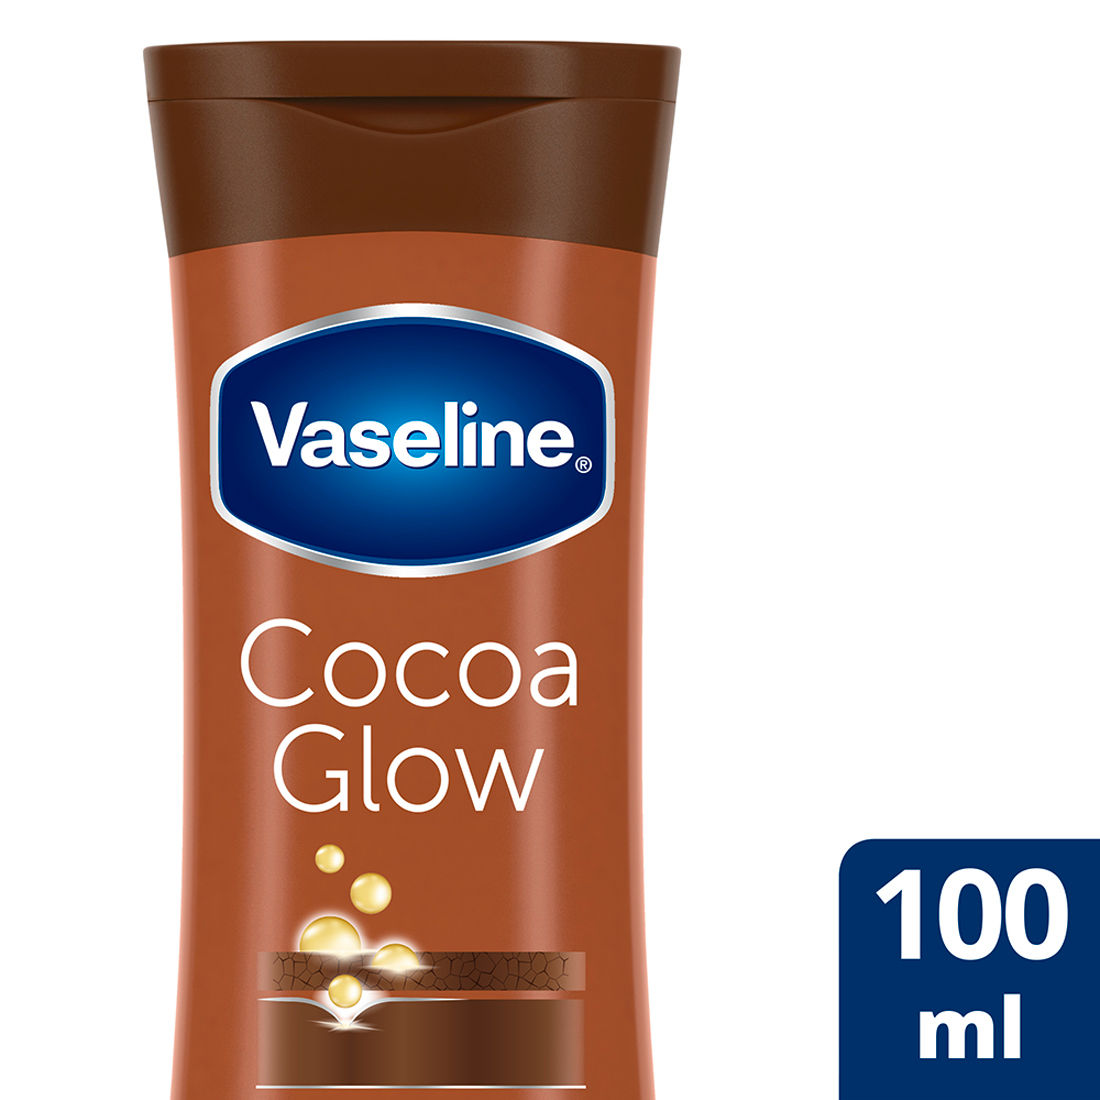 Buy Vaseline Intensive Care Cocoa Glow Body Lotion, 100 ml Online